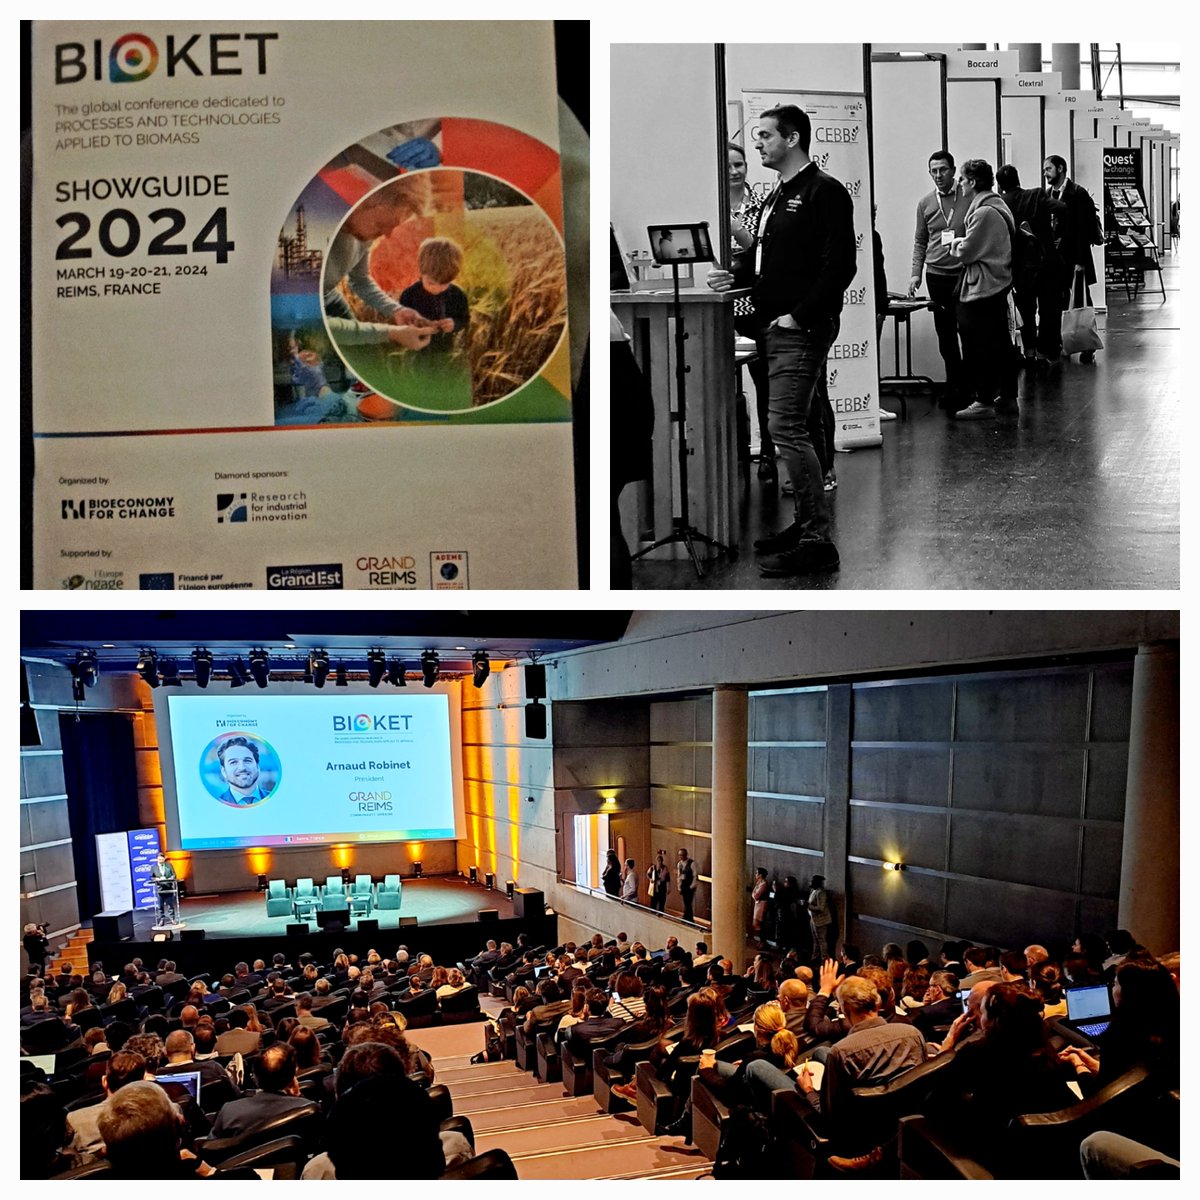 🌿 Excited to announce that the Project Bio-Boost delegation is attending the prestigious Bioket Global Conference in Reims, organized by our partners Bioeconomy For Change. #Bioket2024 #Sustainability #Biomass #Innovation #Technology #ProjectBioBoost #GlobalConference #Reims